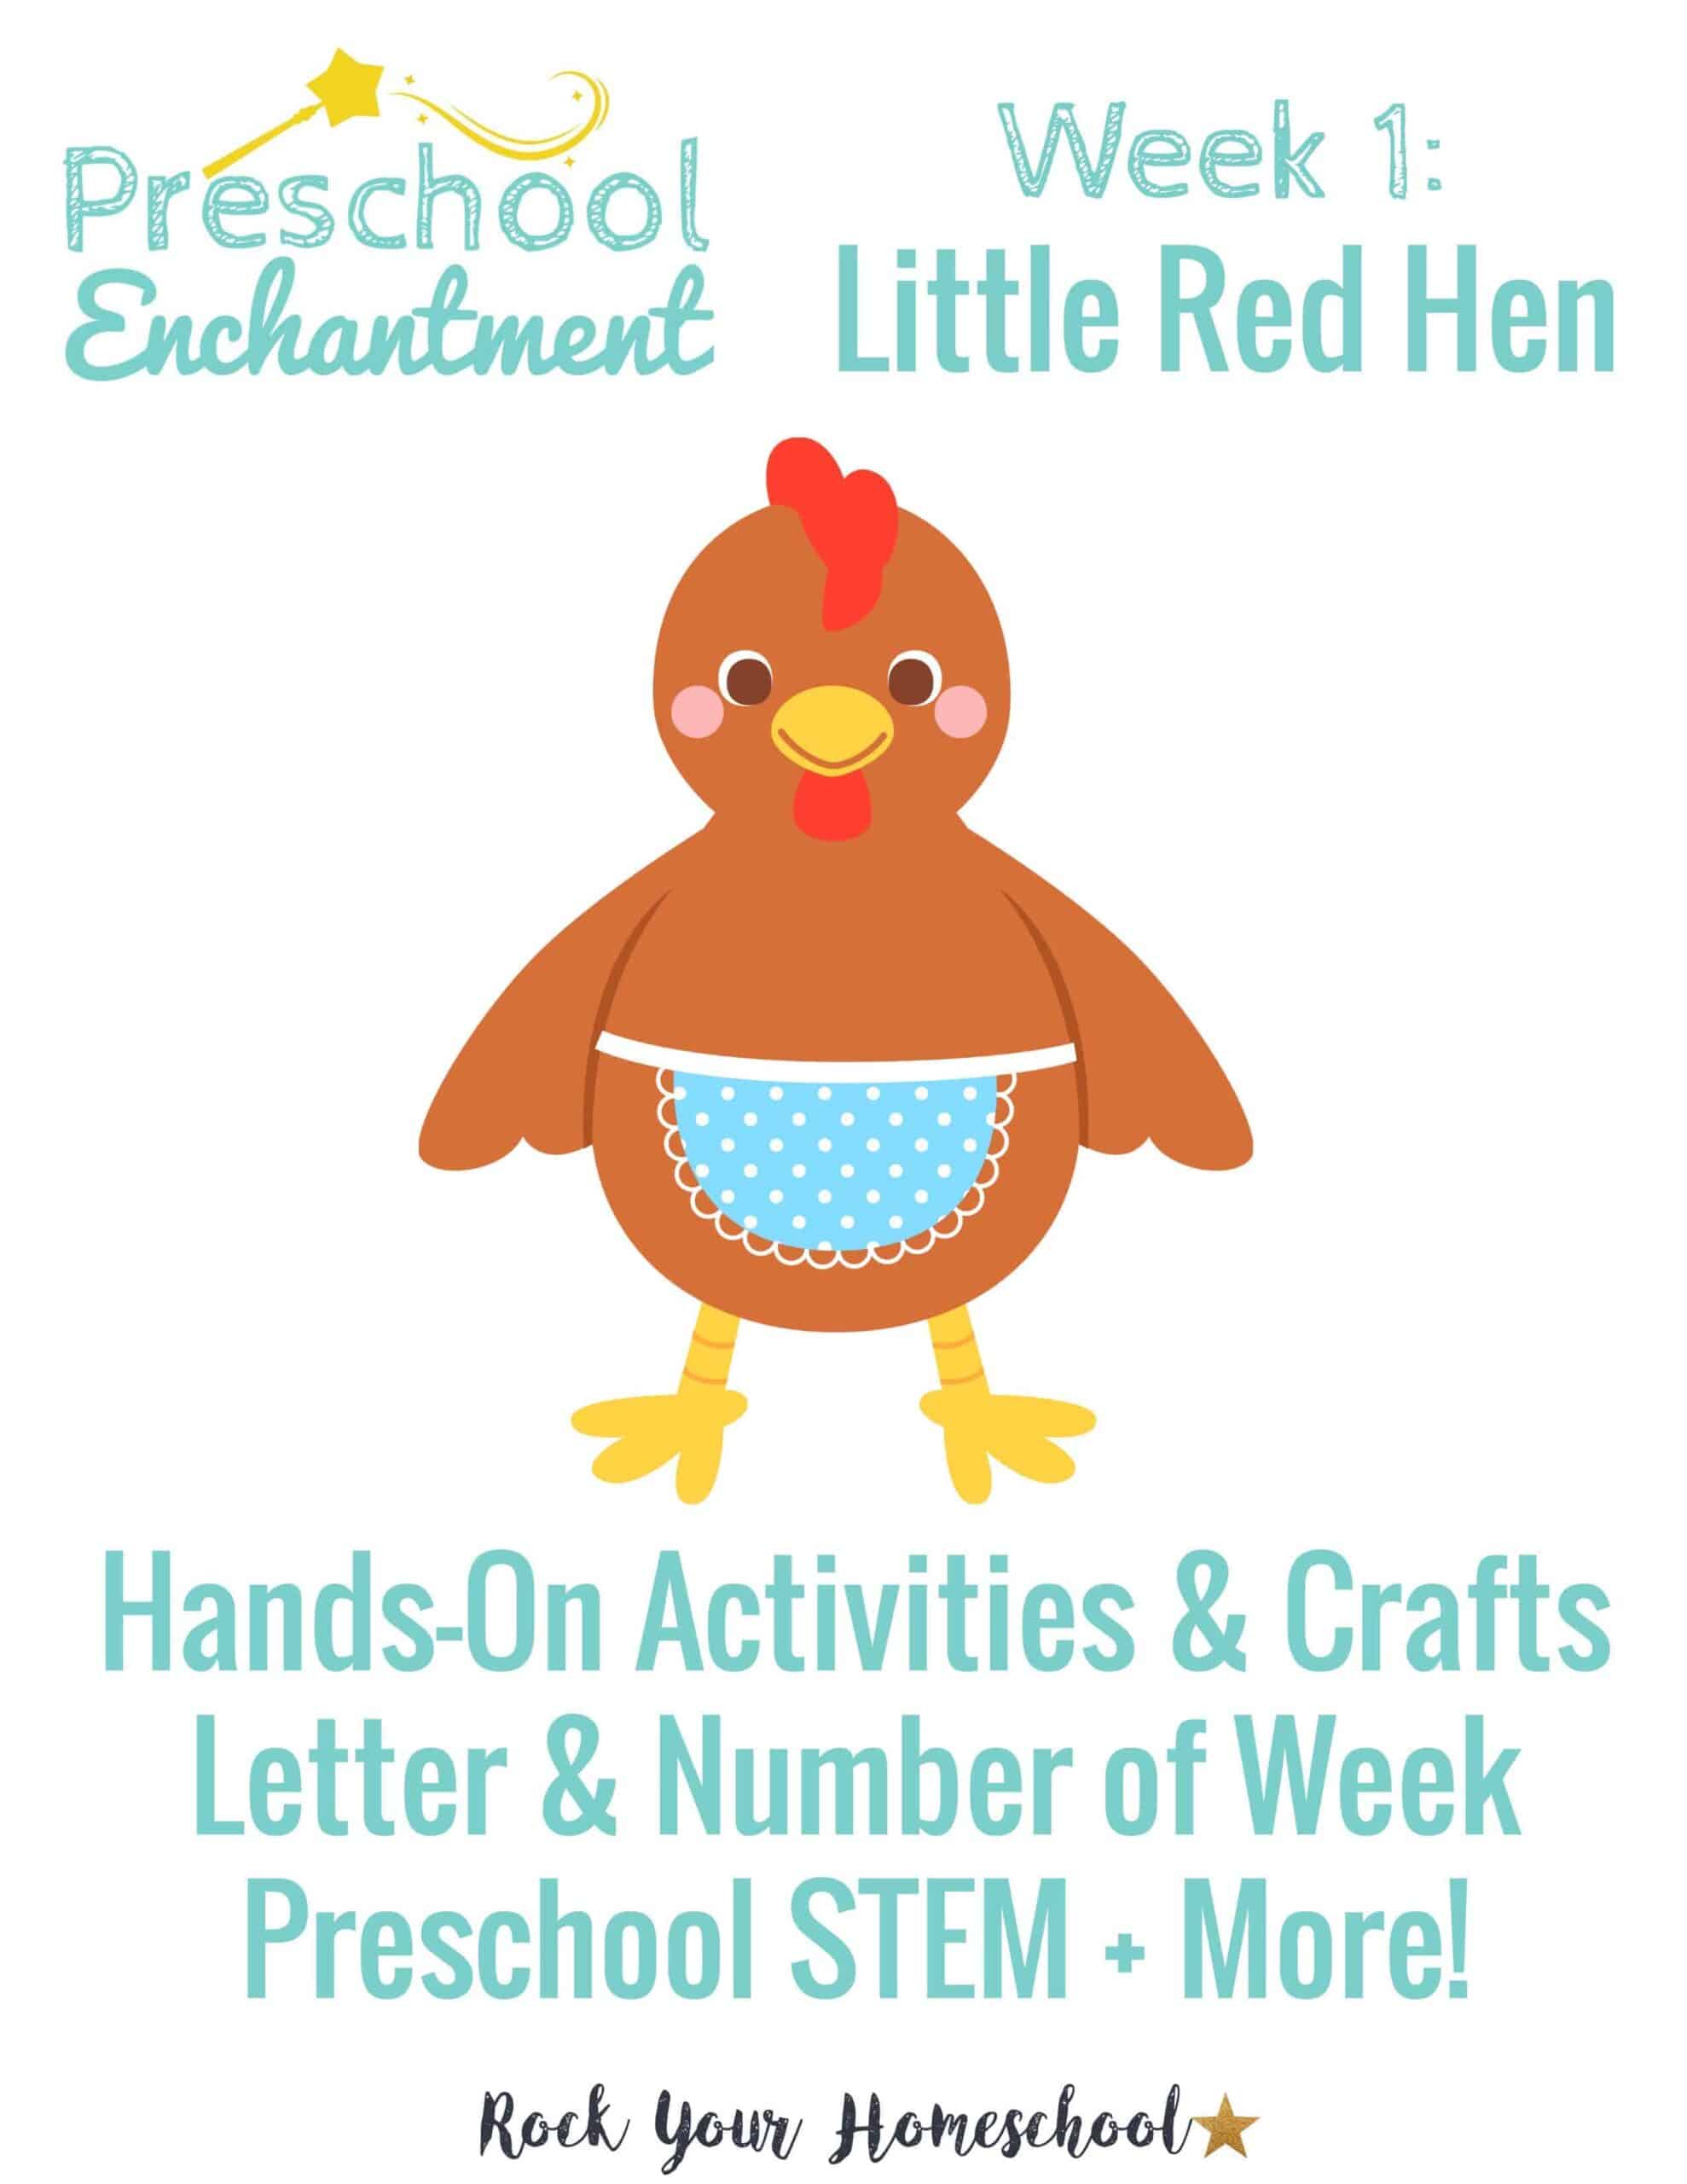 Preschool Enchantment Unit Studies are designed to help you have hands-on learning fun with your young learners.